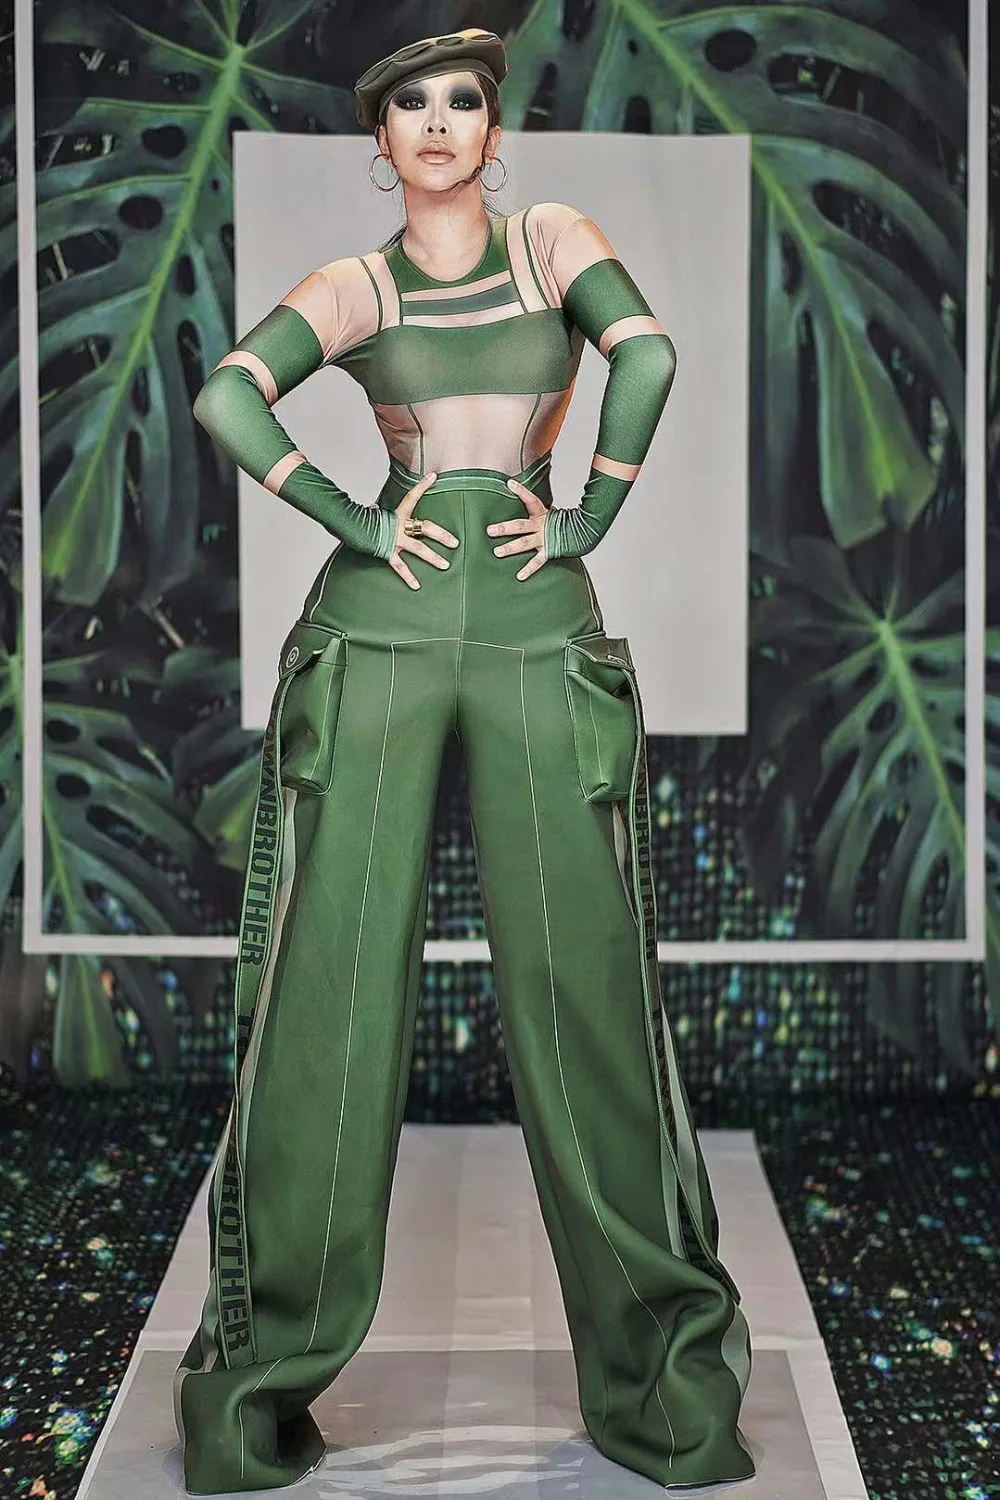 2019 Sexy Green Military Uniform Long Sleeves Bodysuit Nightclub Bar Outfit Women Dance Stage Wear Jumpsuit Outfit